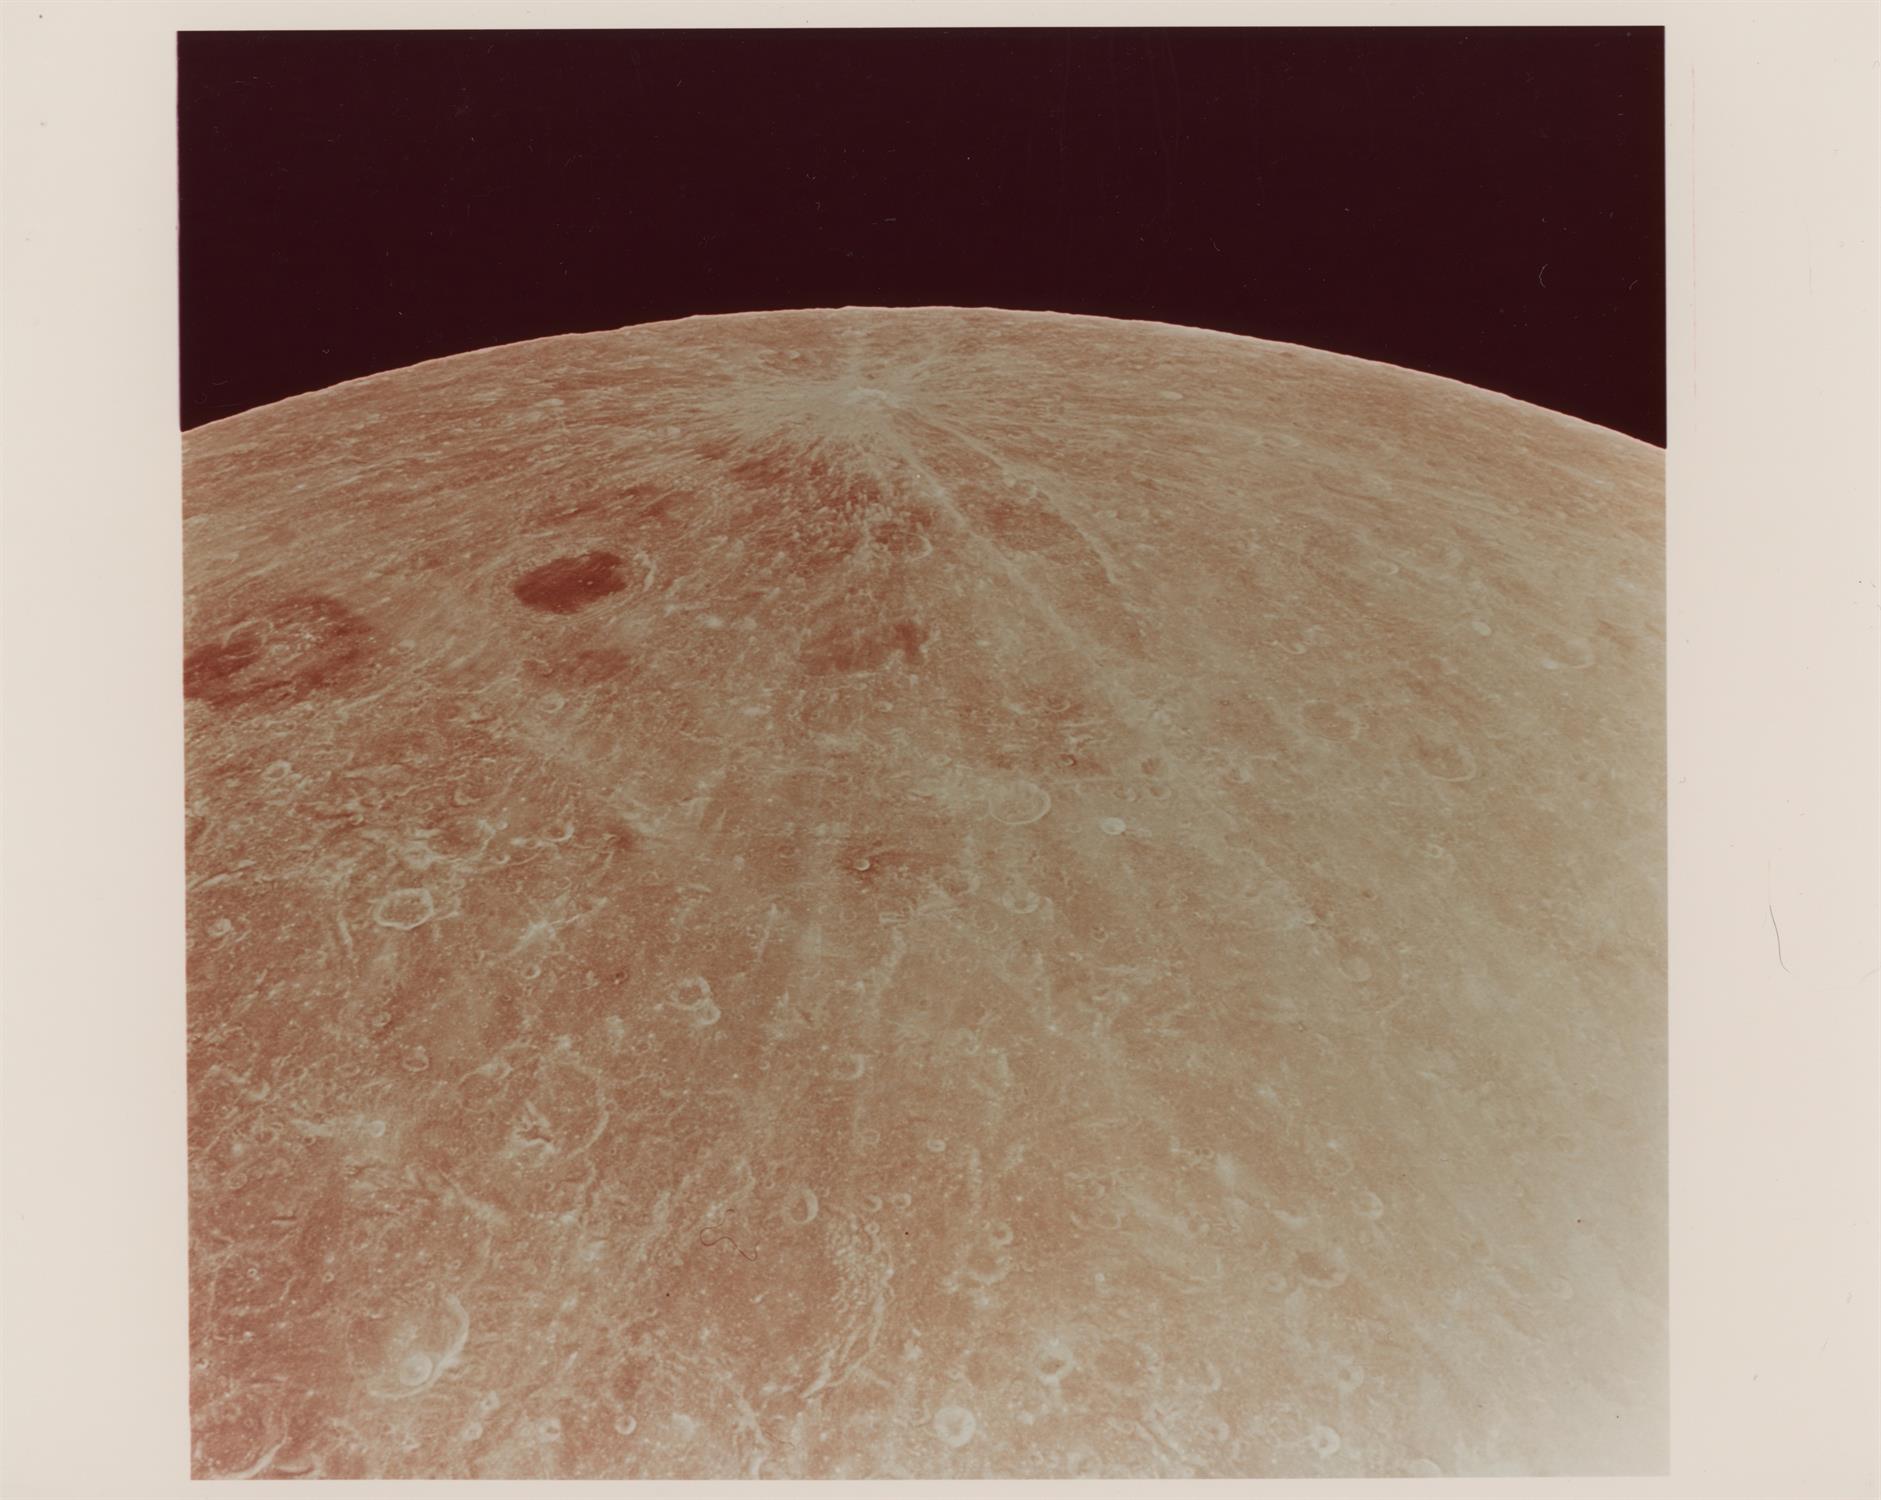 Views of the receding Moon after transearth injection, Apollo 11, July 1969 - Image 4 of 4